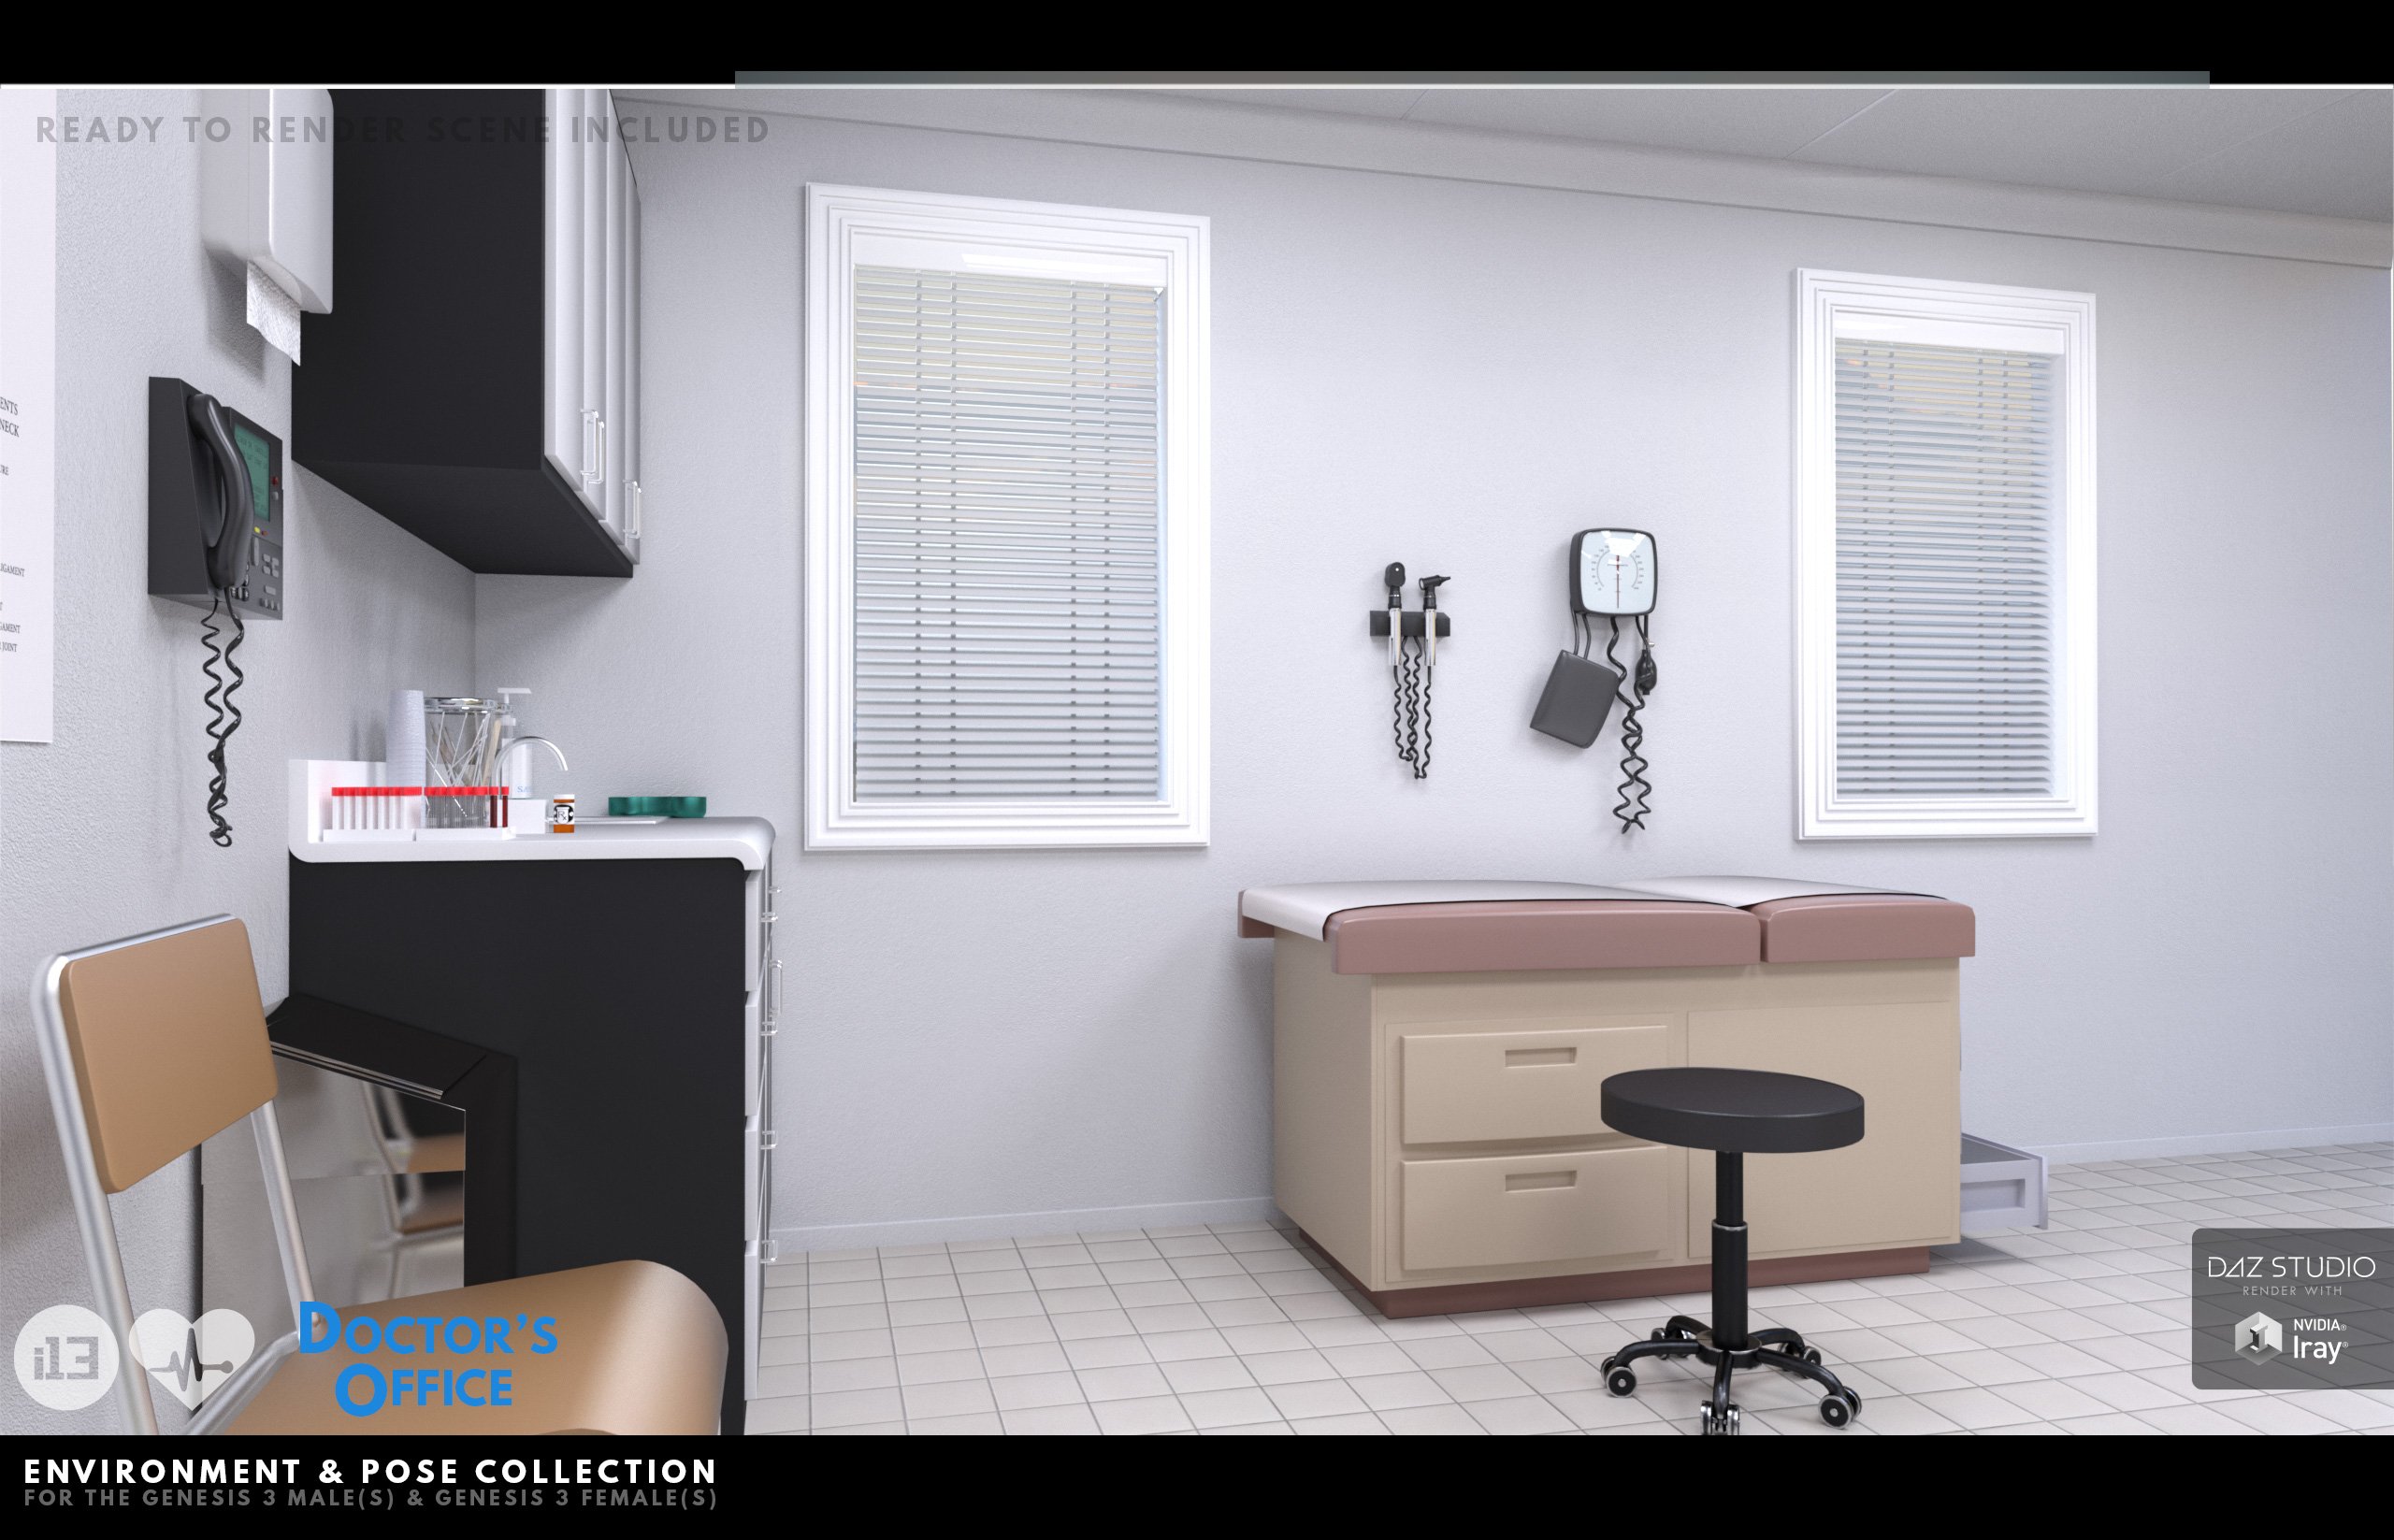 i13 Doctor's Office Environment with Poses by: ironman13, 3D Models by Daz 3D